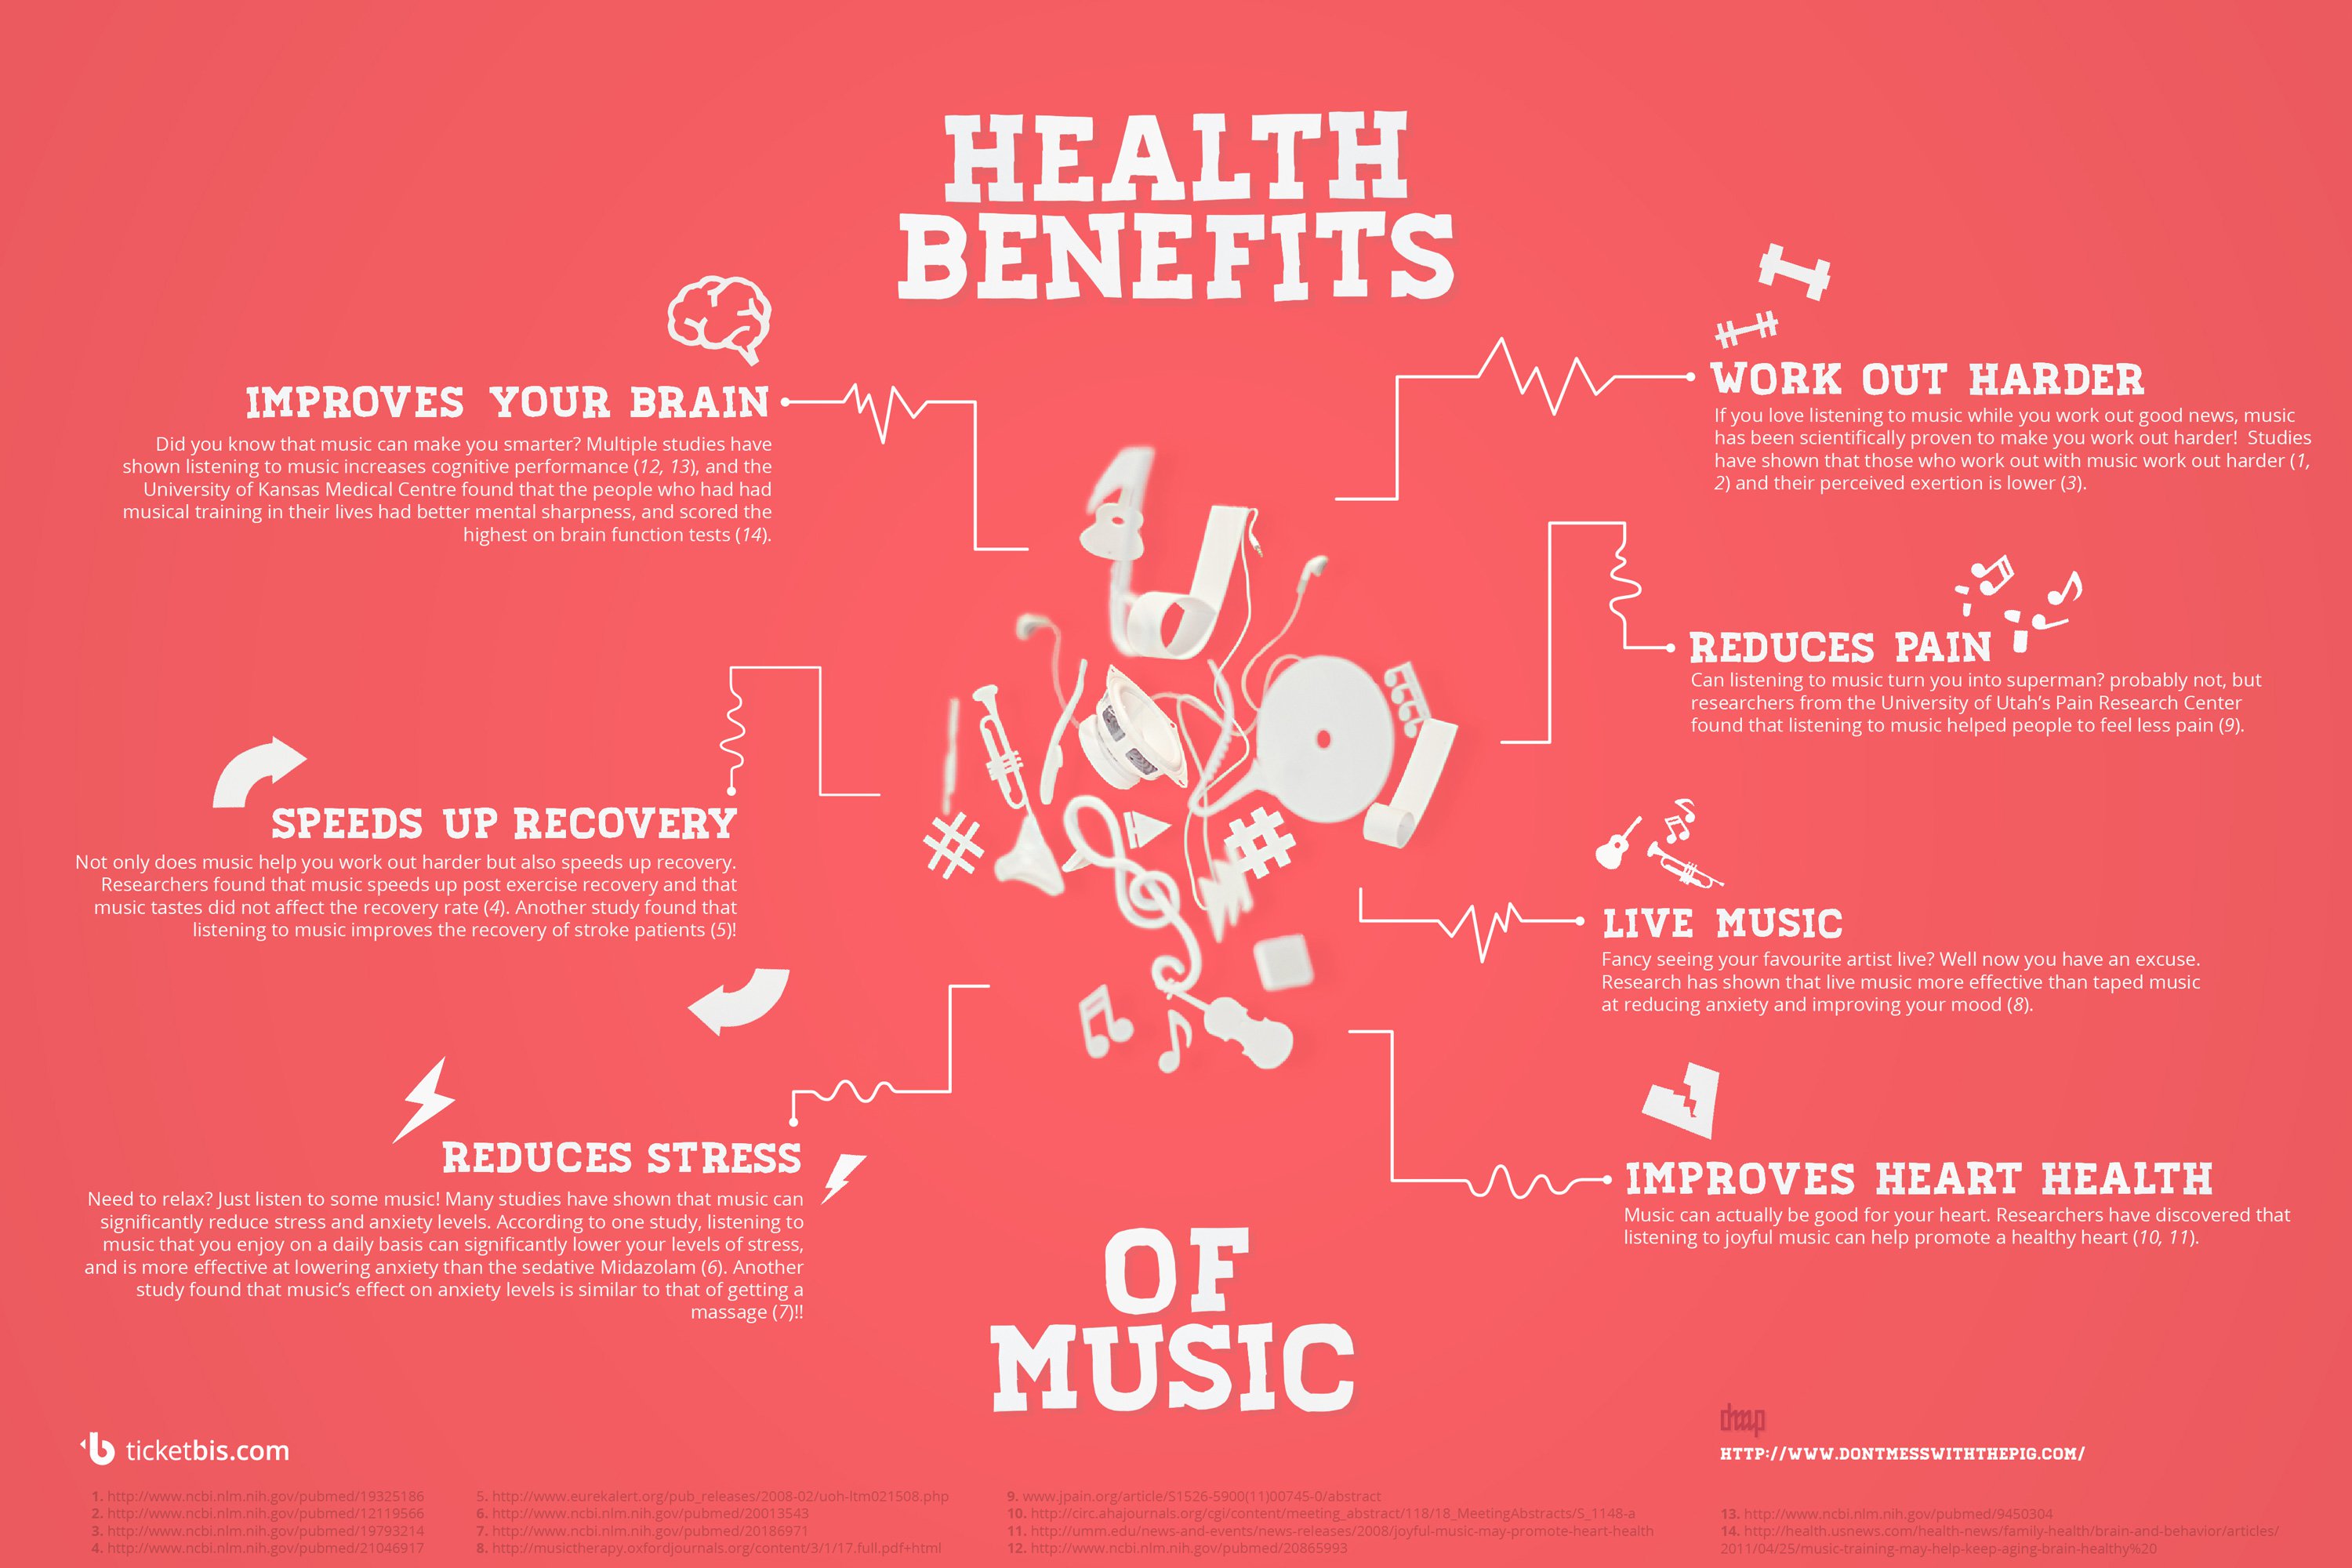 Health benefits of music (infographic)